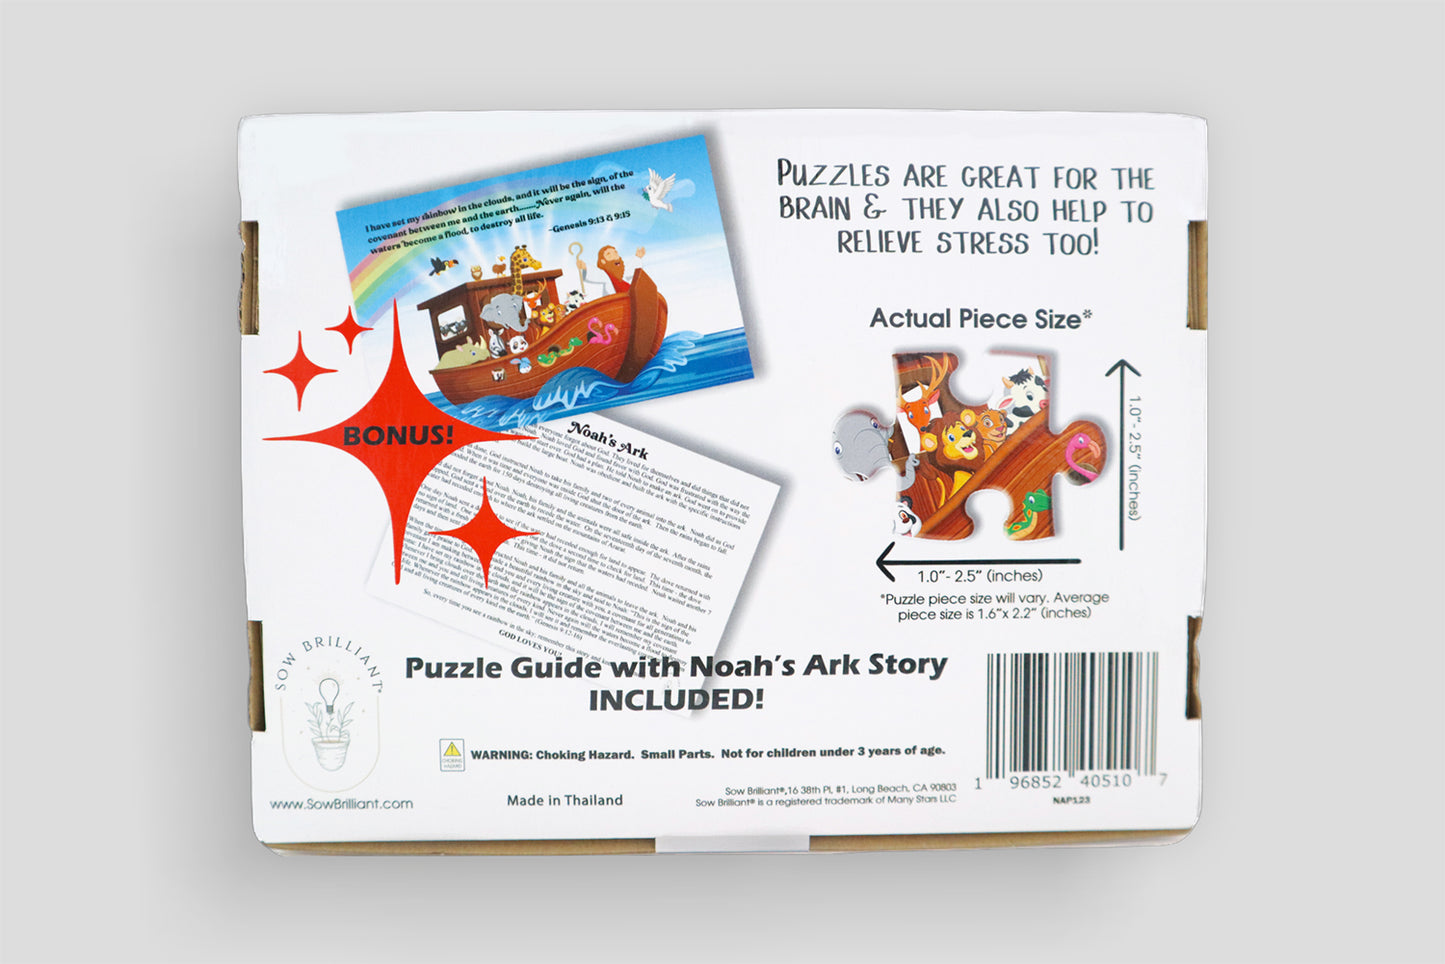 Back of box illustration that displays the actual puzzle piece size and bonus puzzle guide with bible story card I Sow Brilliant